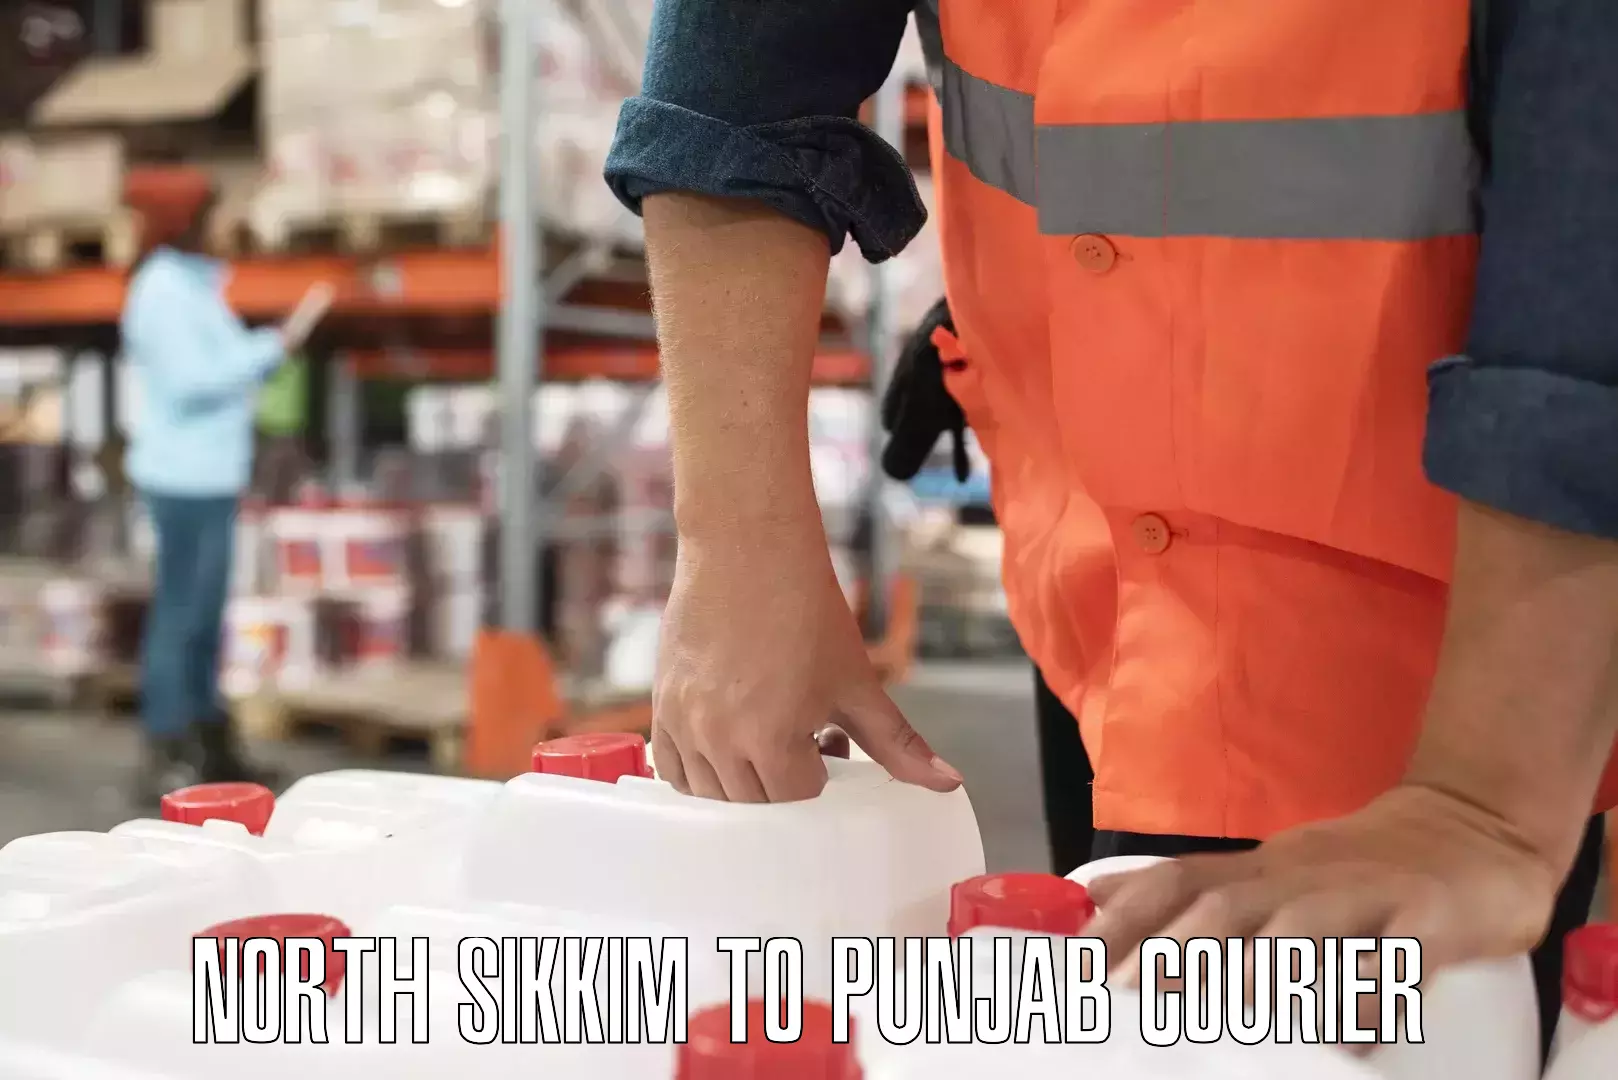 Courier service partnerships North Sikkim to Punjab